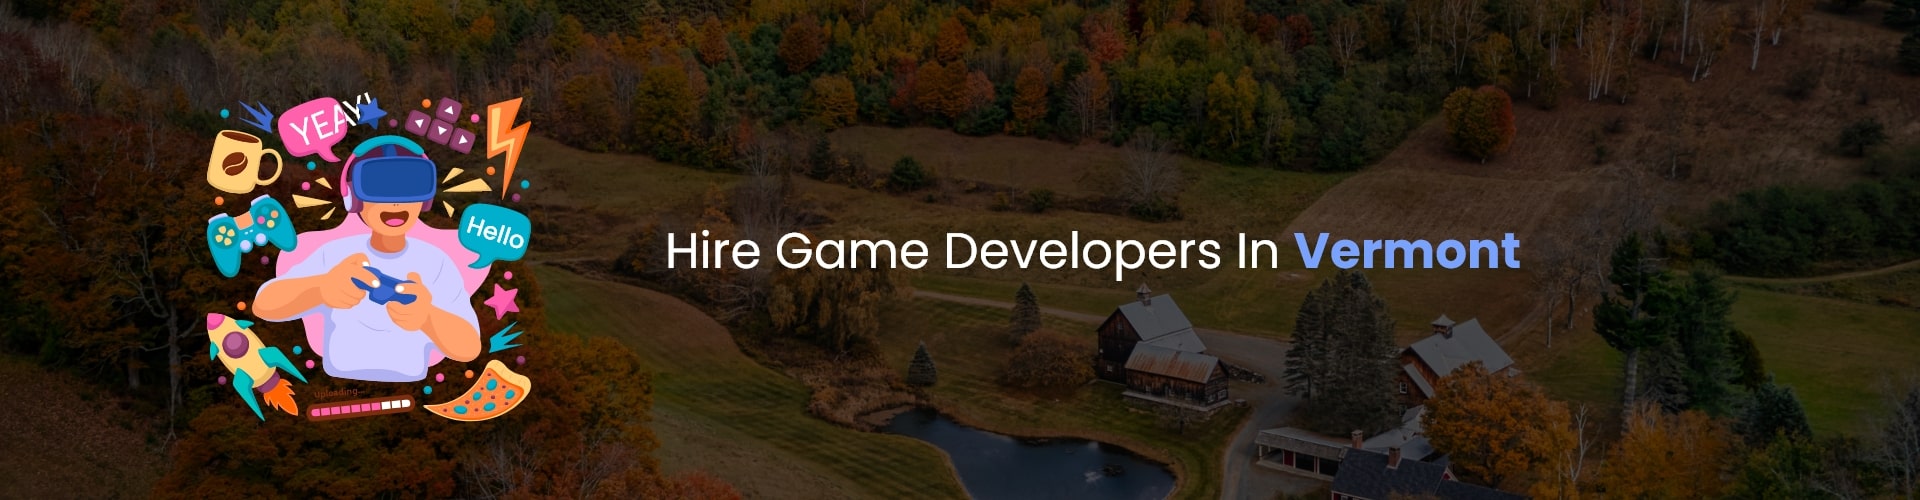 hire game developers in vermont